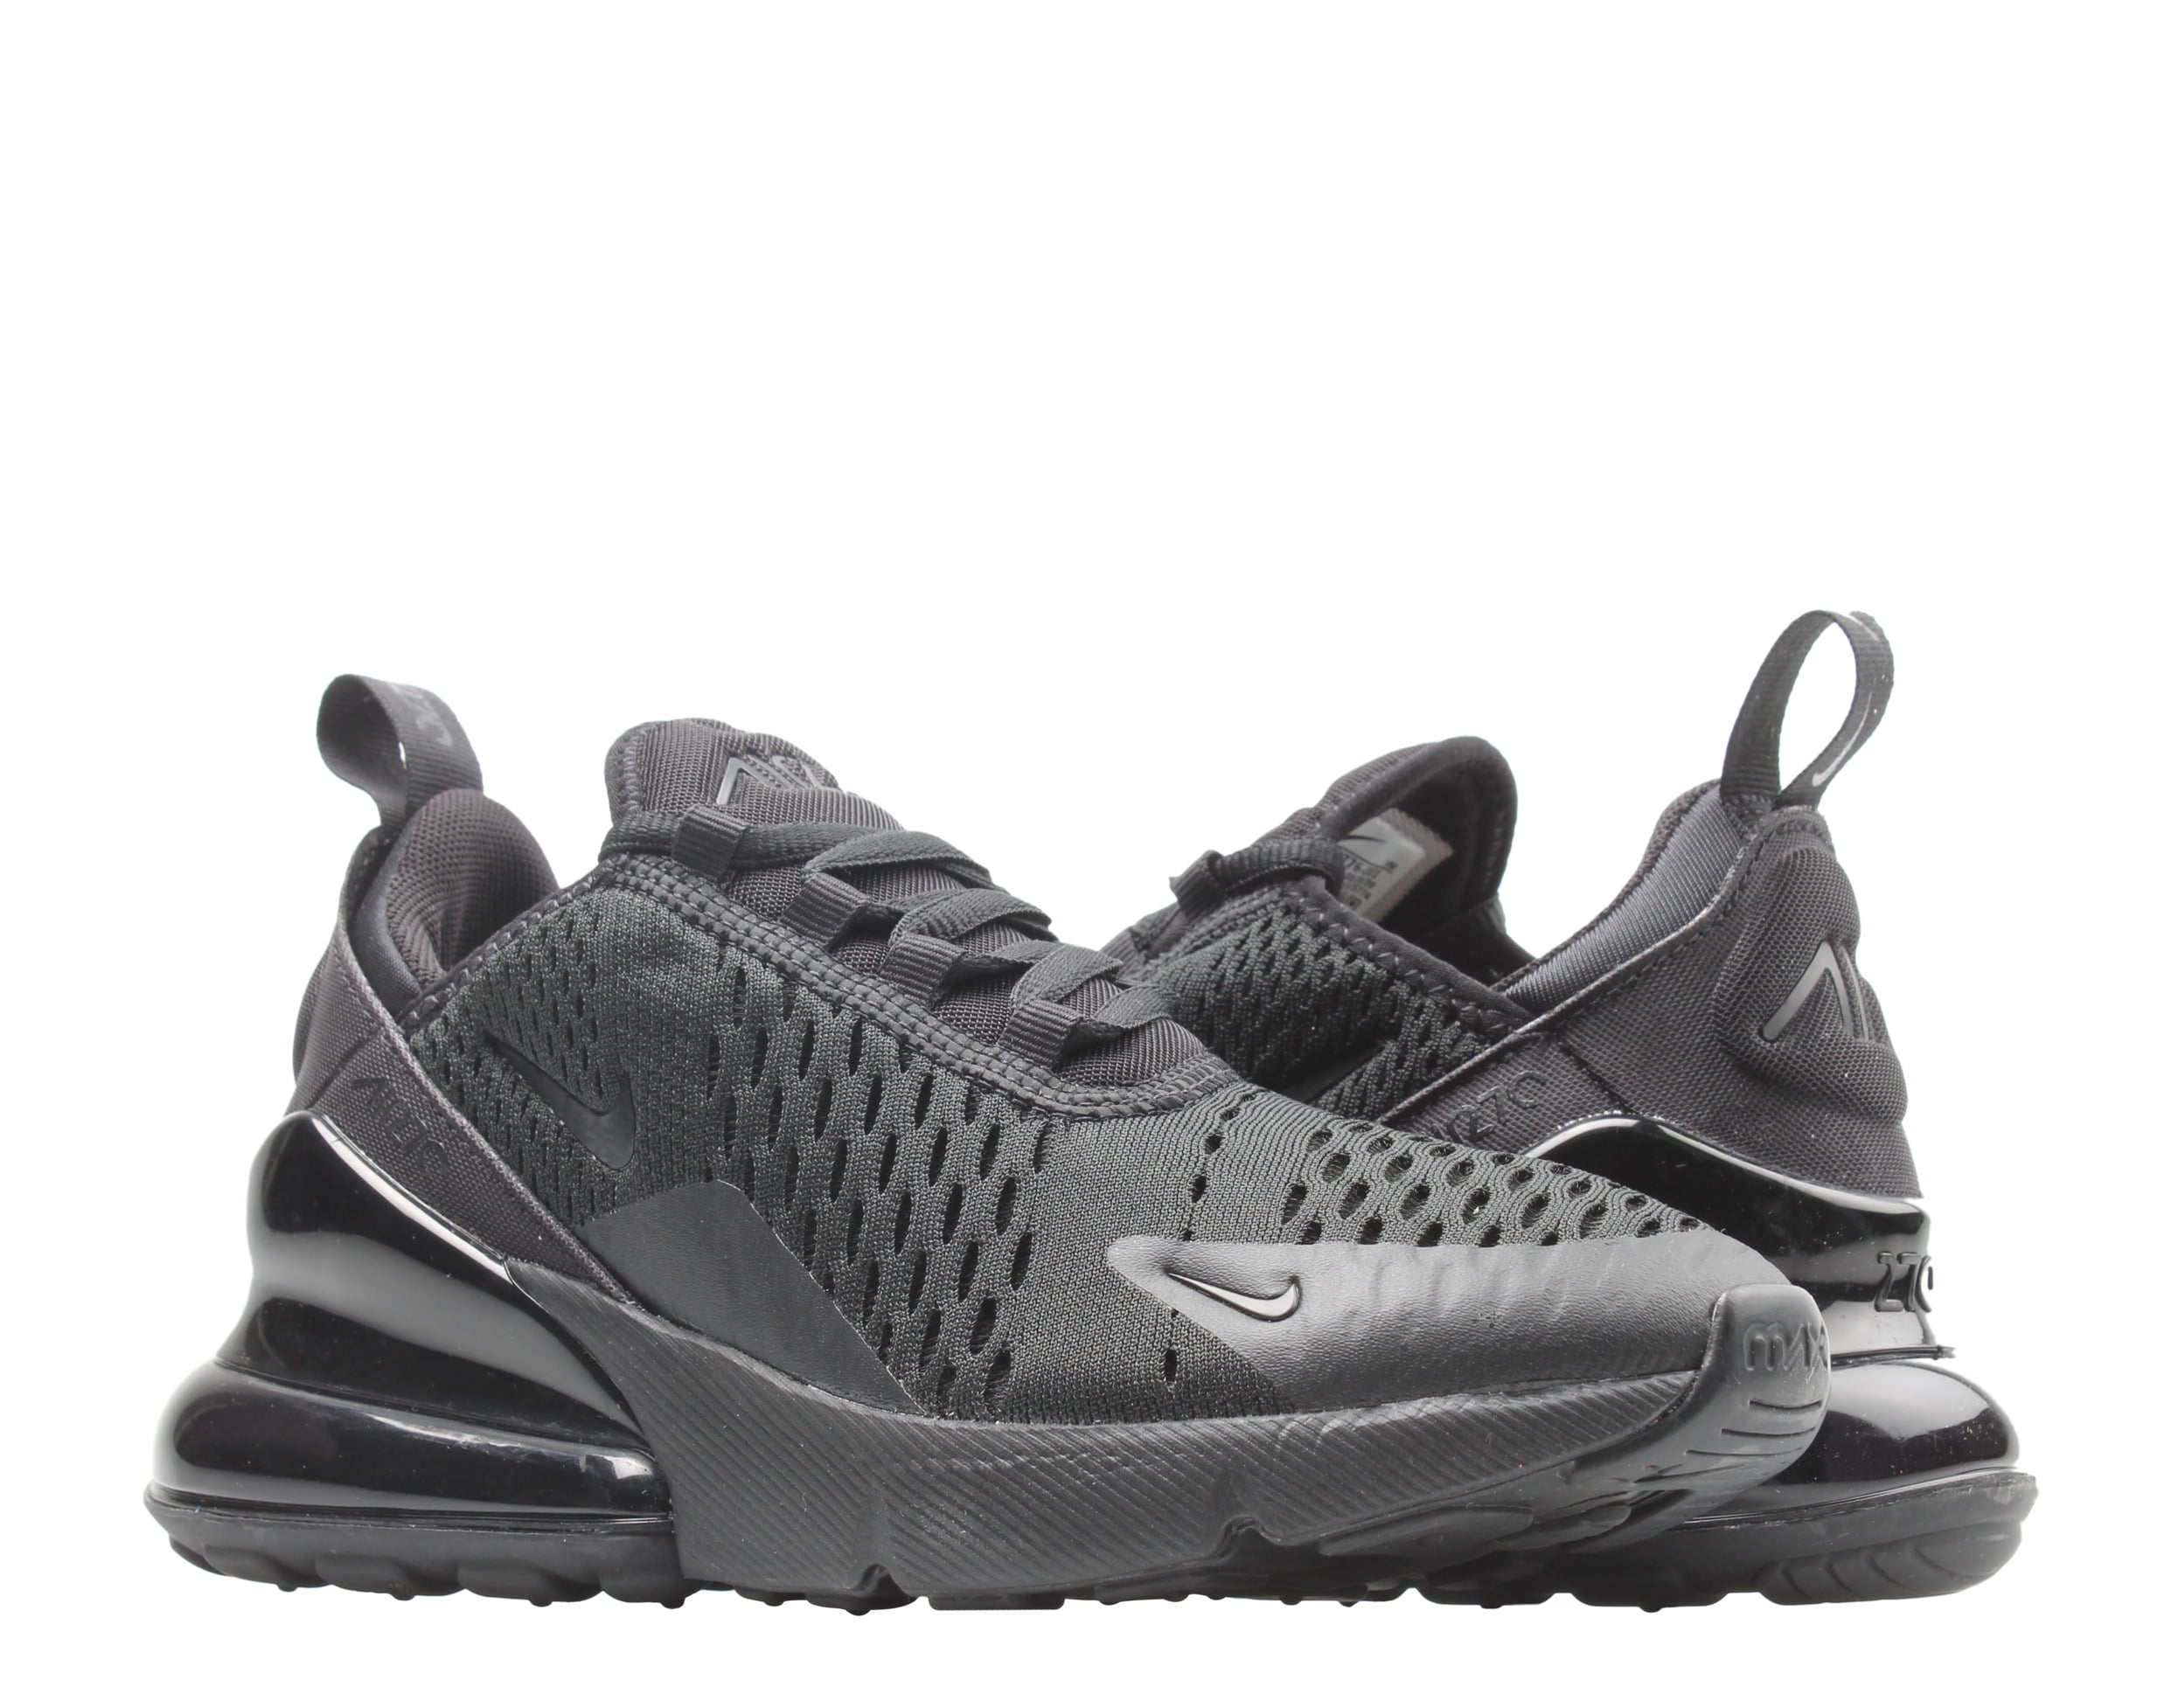 Vader fage Religieus ruw Nike Kids GS Air Max 270 Life Style Sneakers (5.5) - Walmart.com